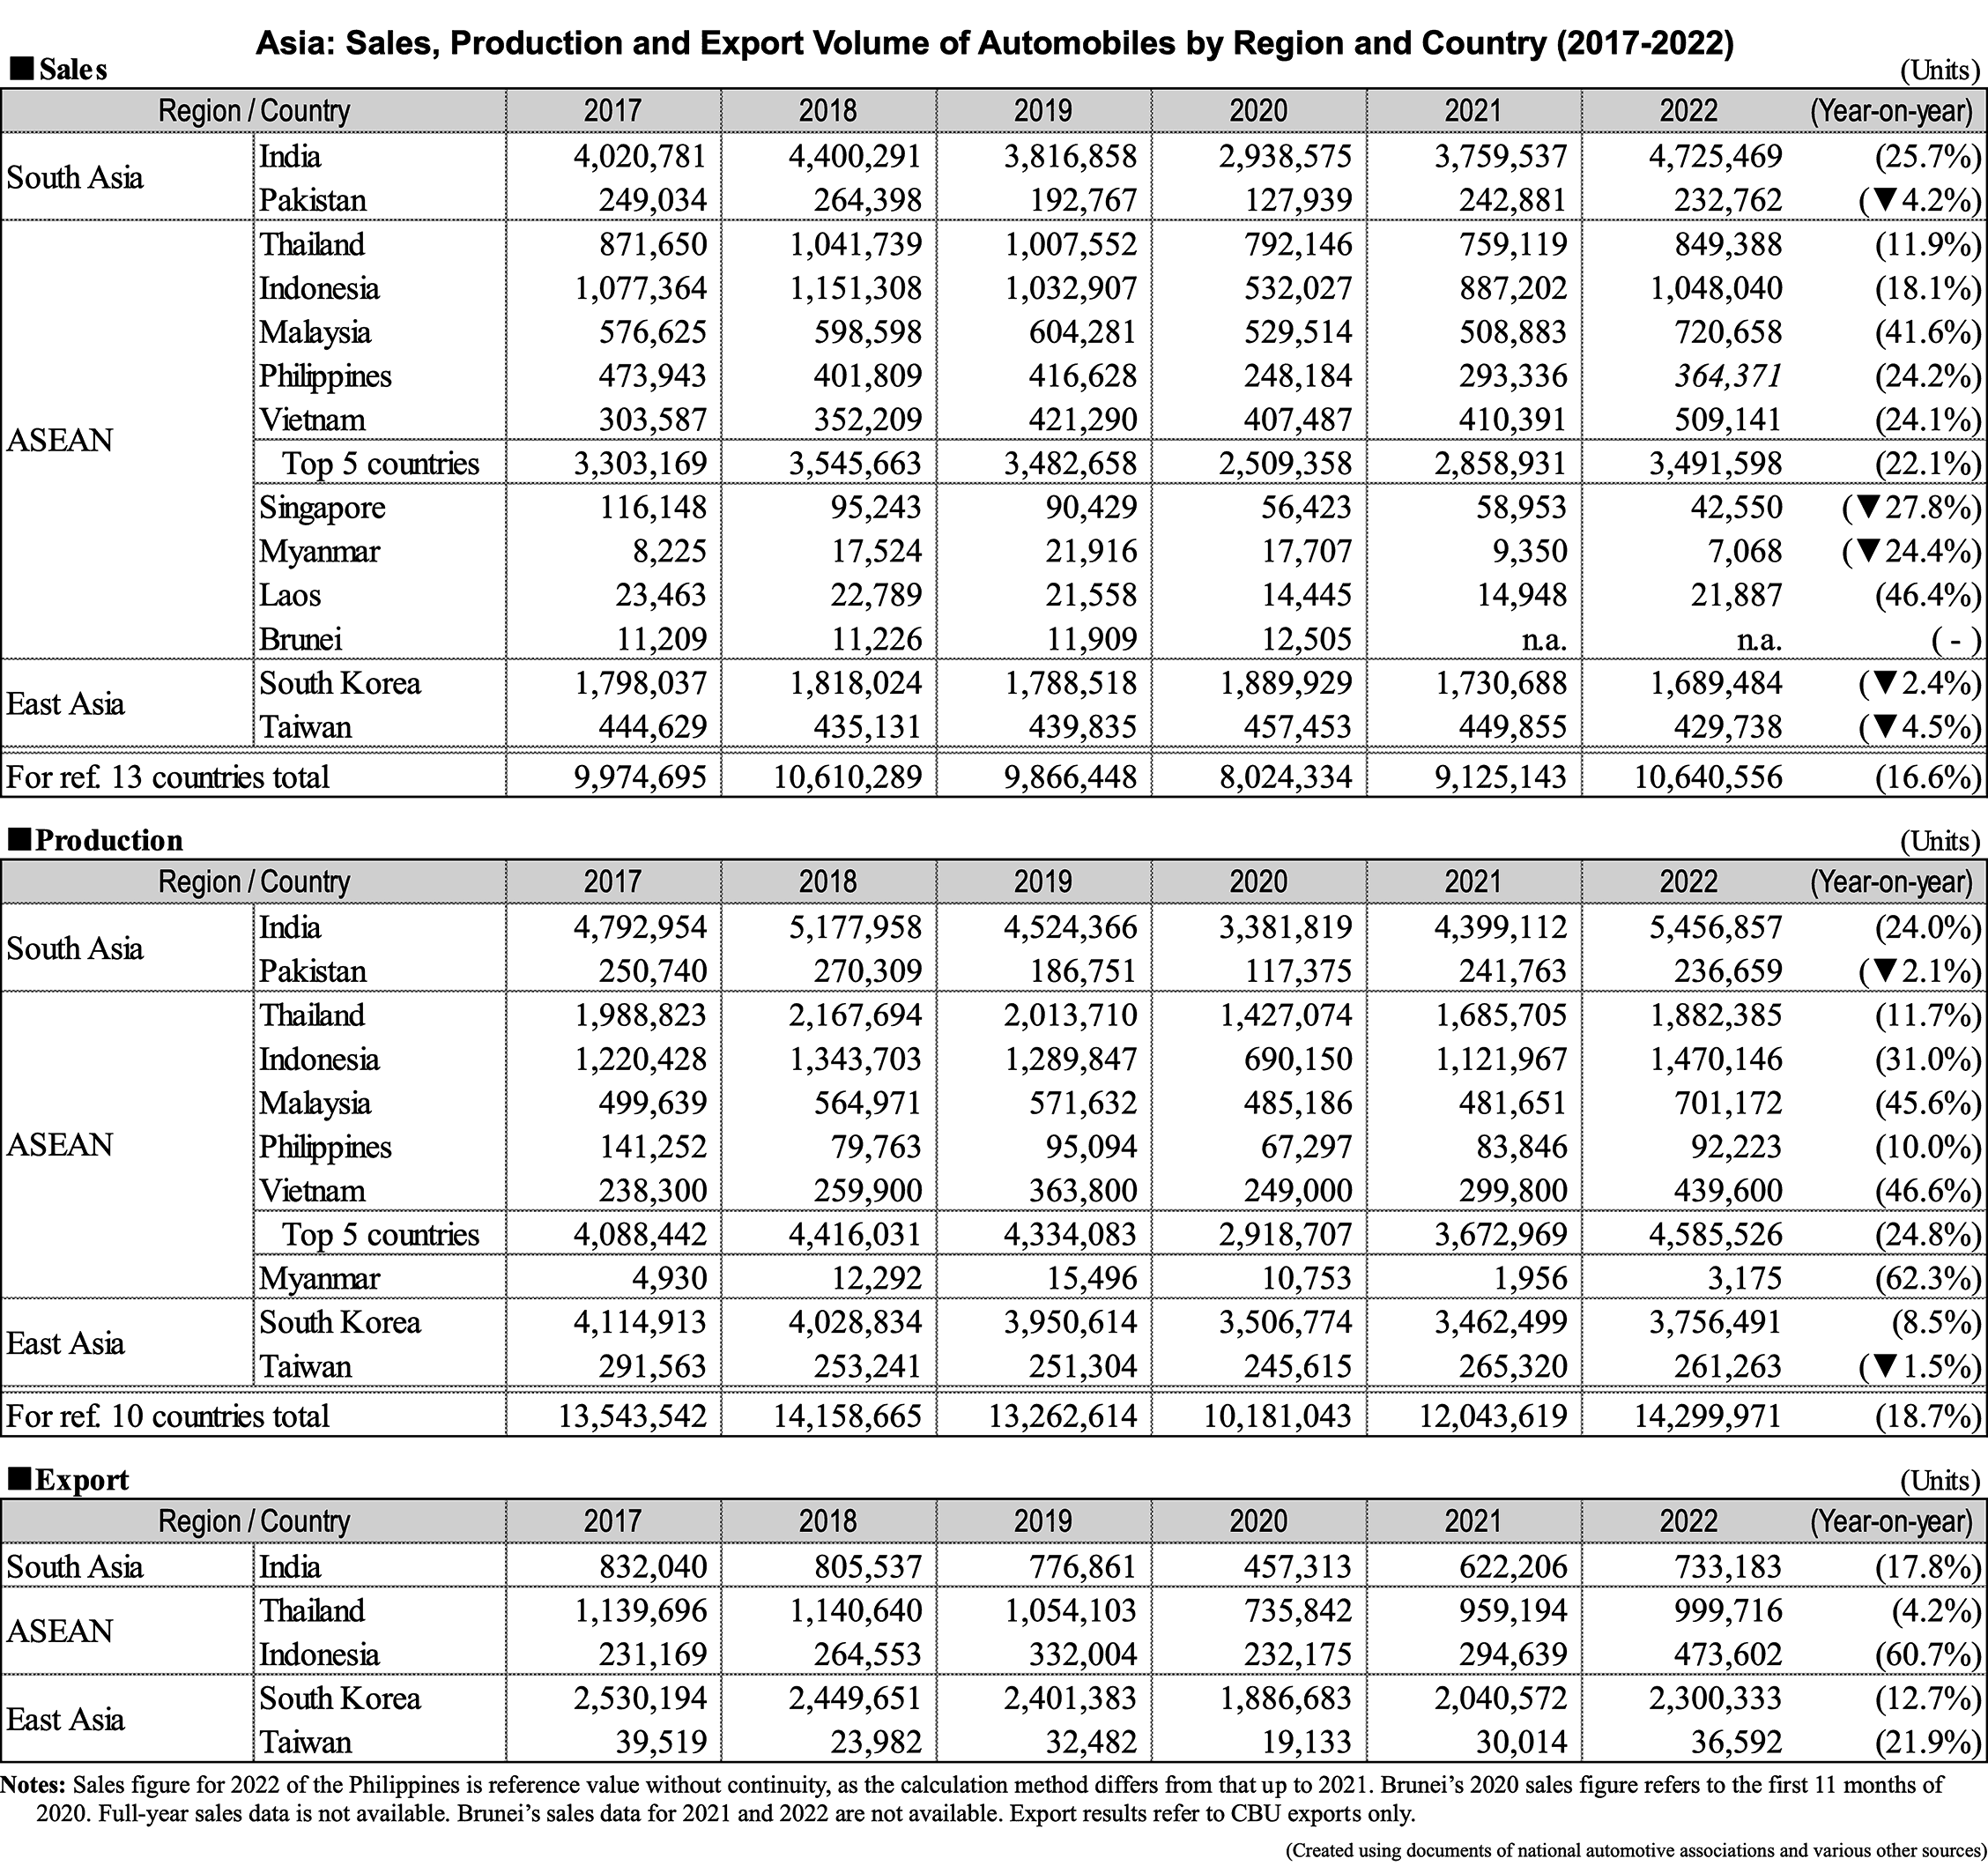 Table data: Asia: Sales, Production and Export Volume of Automobiles by Region and Country (2017-2022)